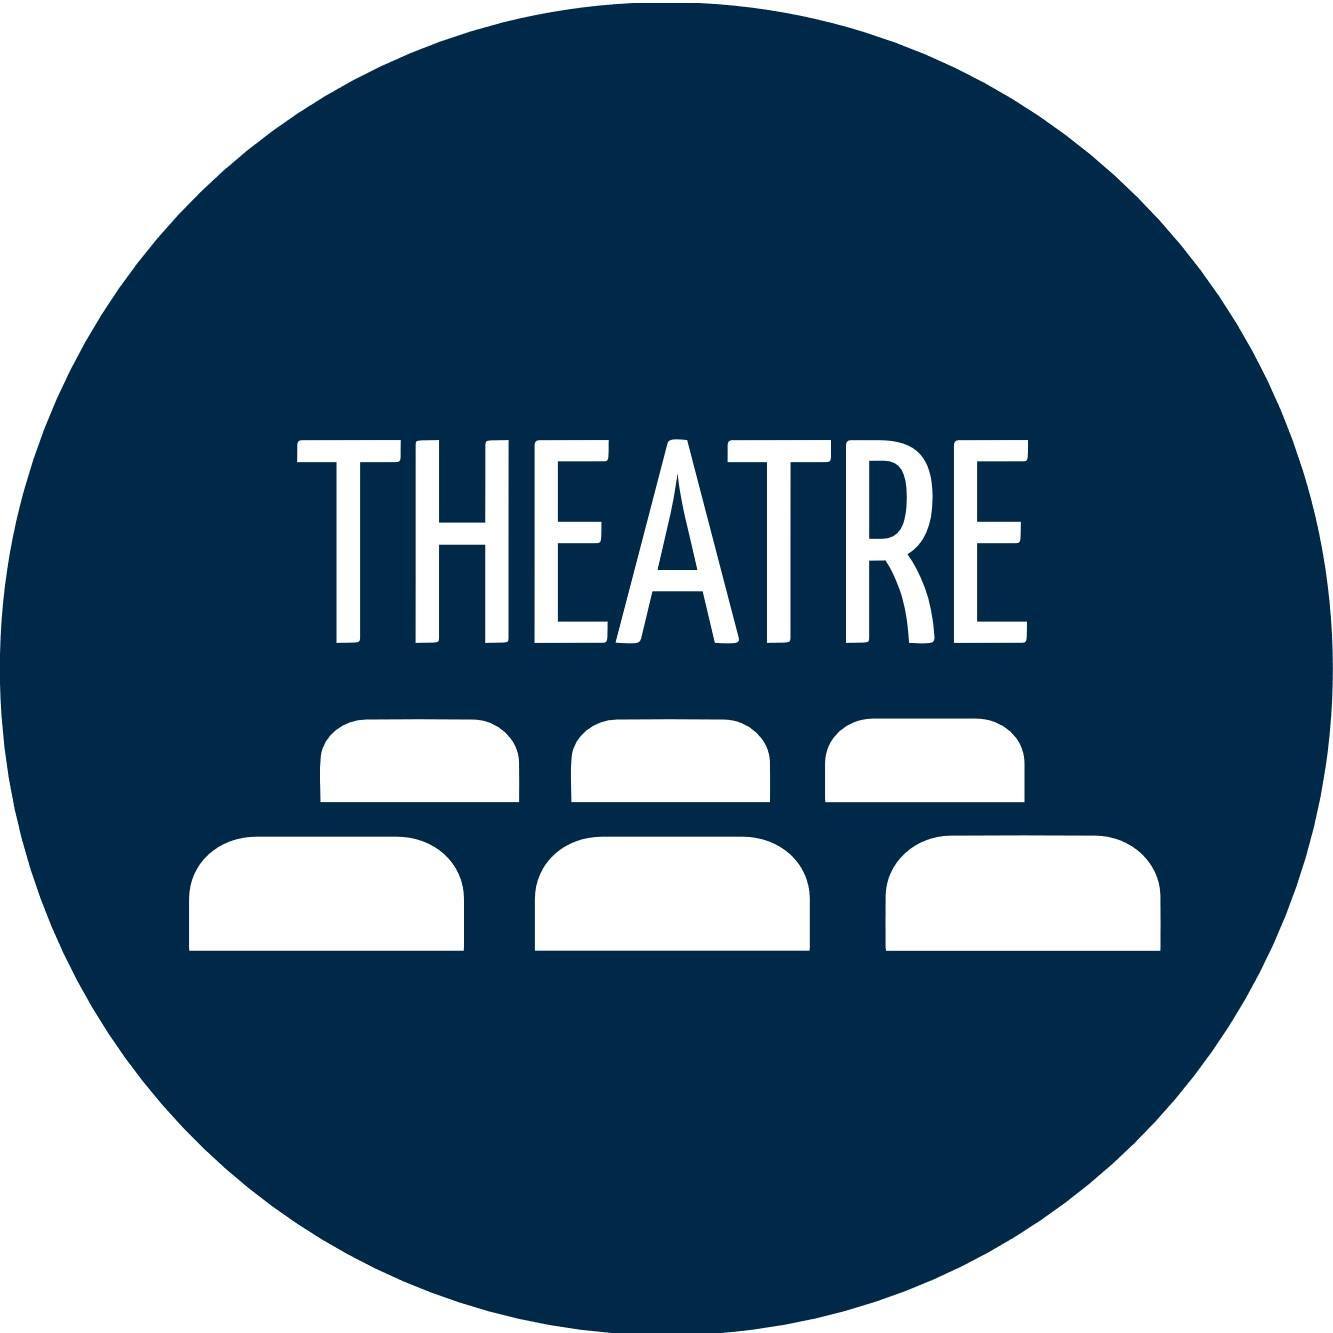 MCLA Theatre Logo. It is a blue square with white rectangles inside to give th appearance of theatre seating. 